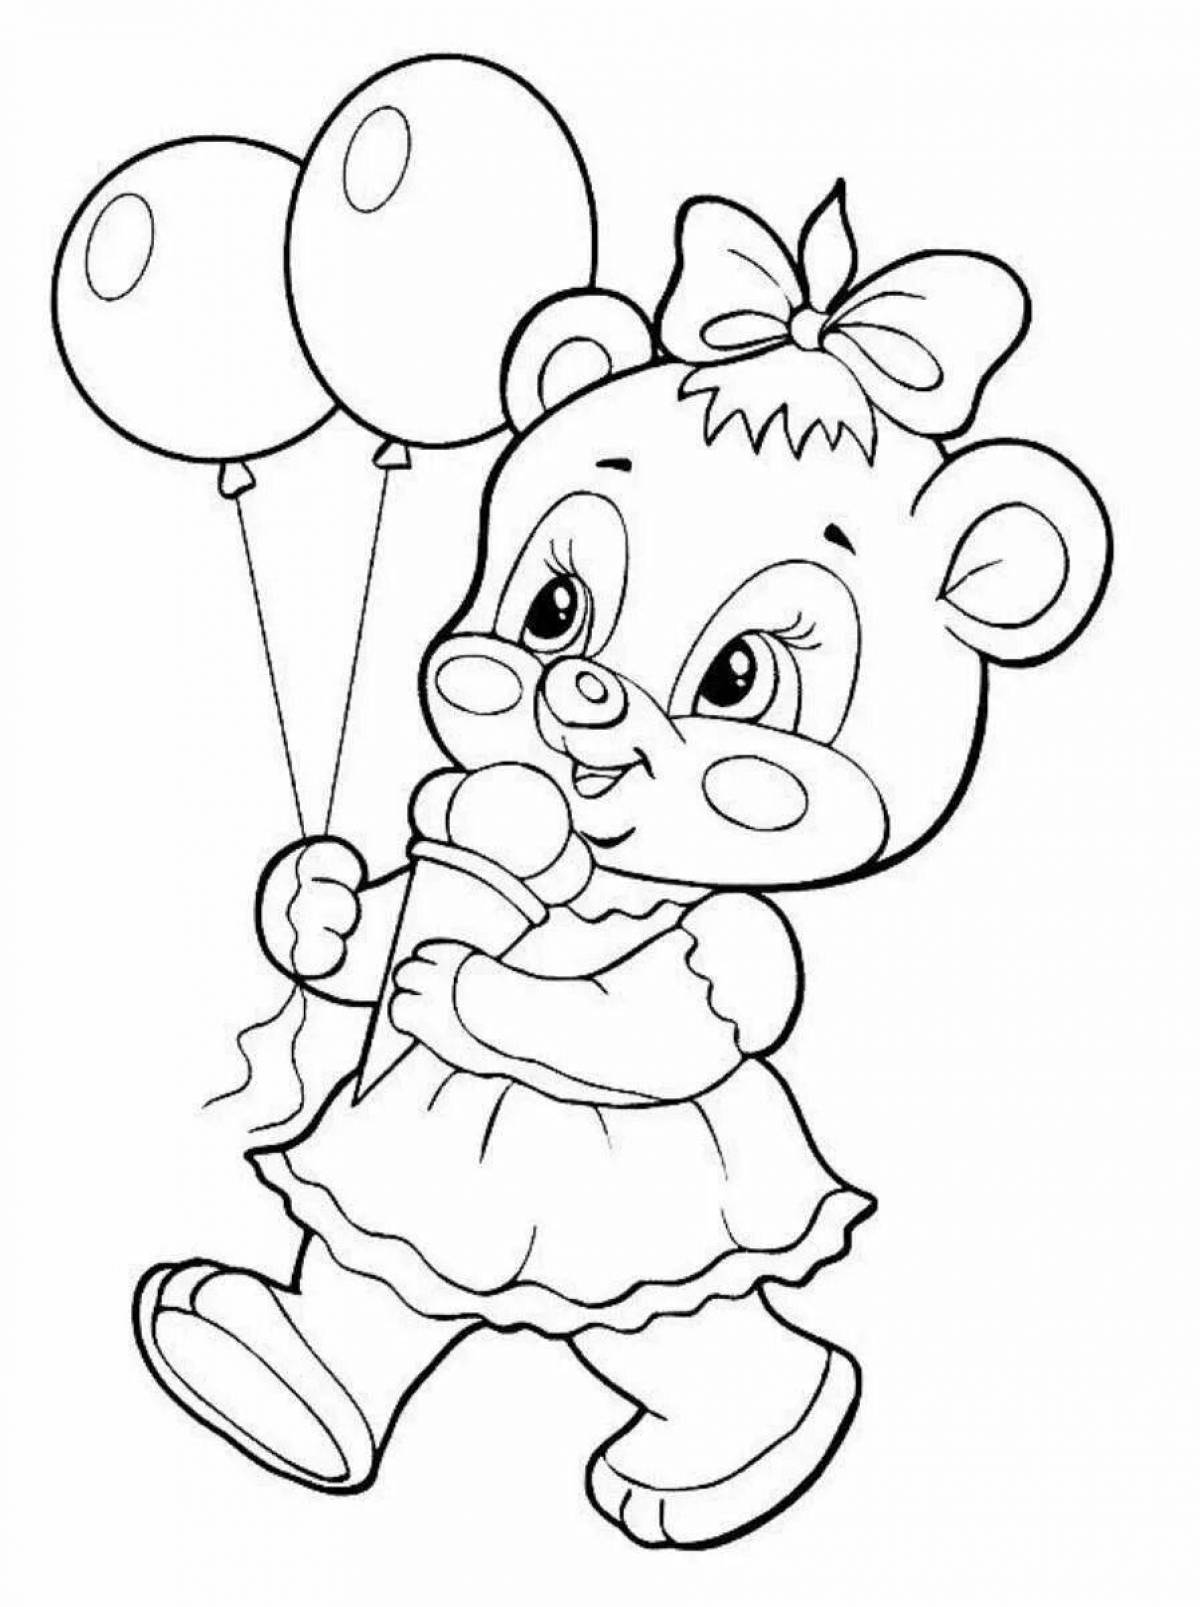 Energetic coloring girl with balloons